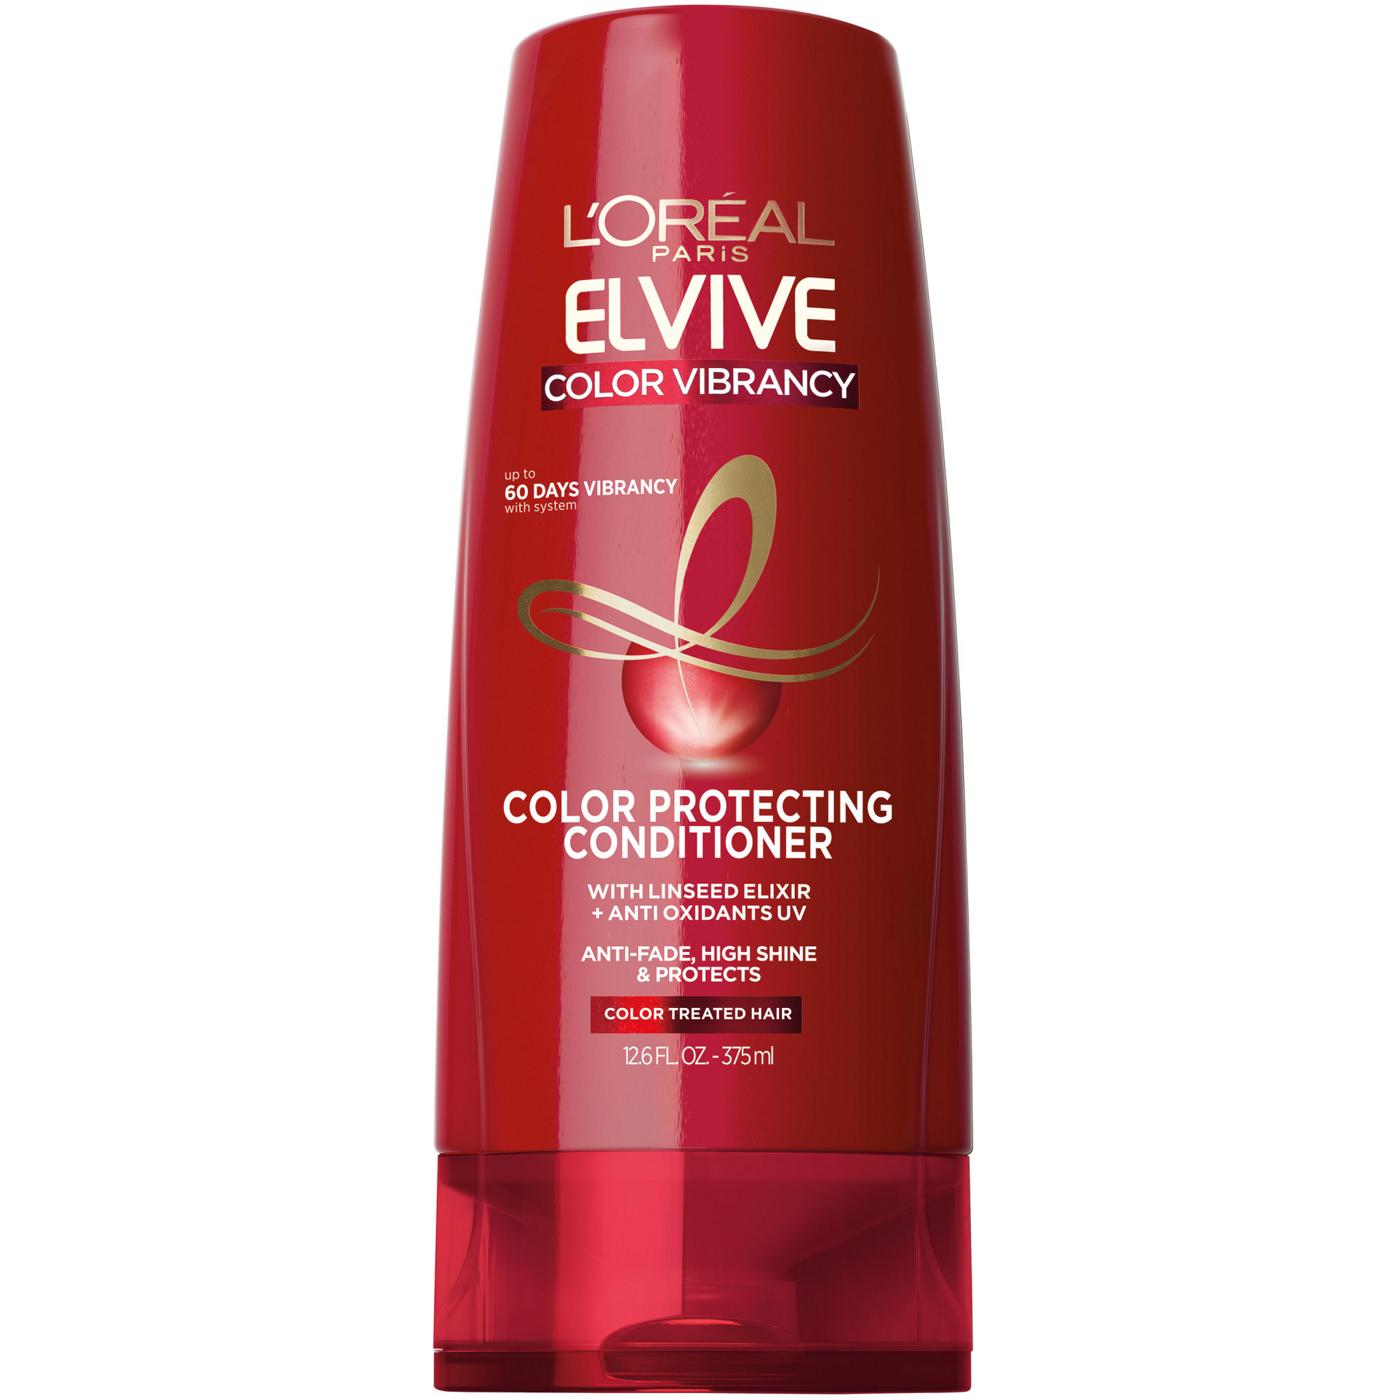 L'Oréal Paris Elvive Color Vibrancy Protecting Conditioner with Anti-Oxidants; image 1 of 6